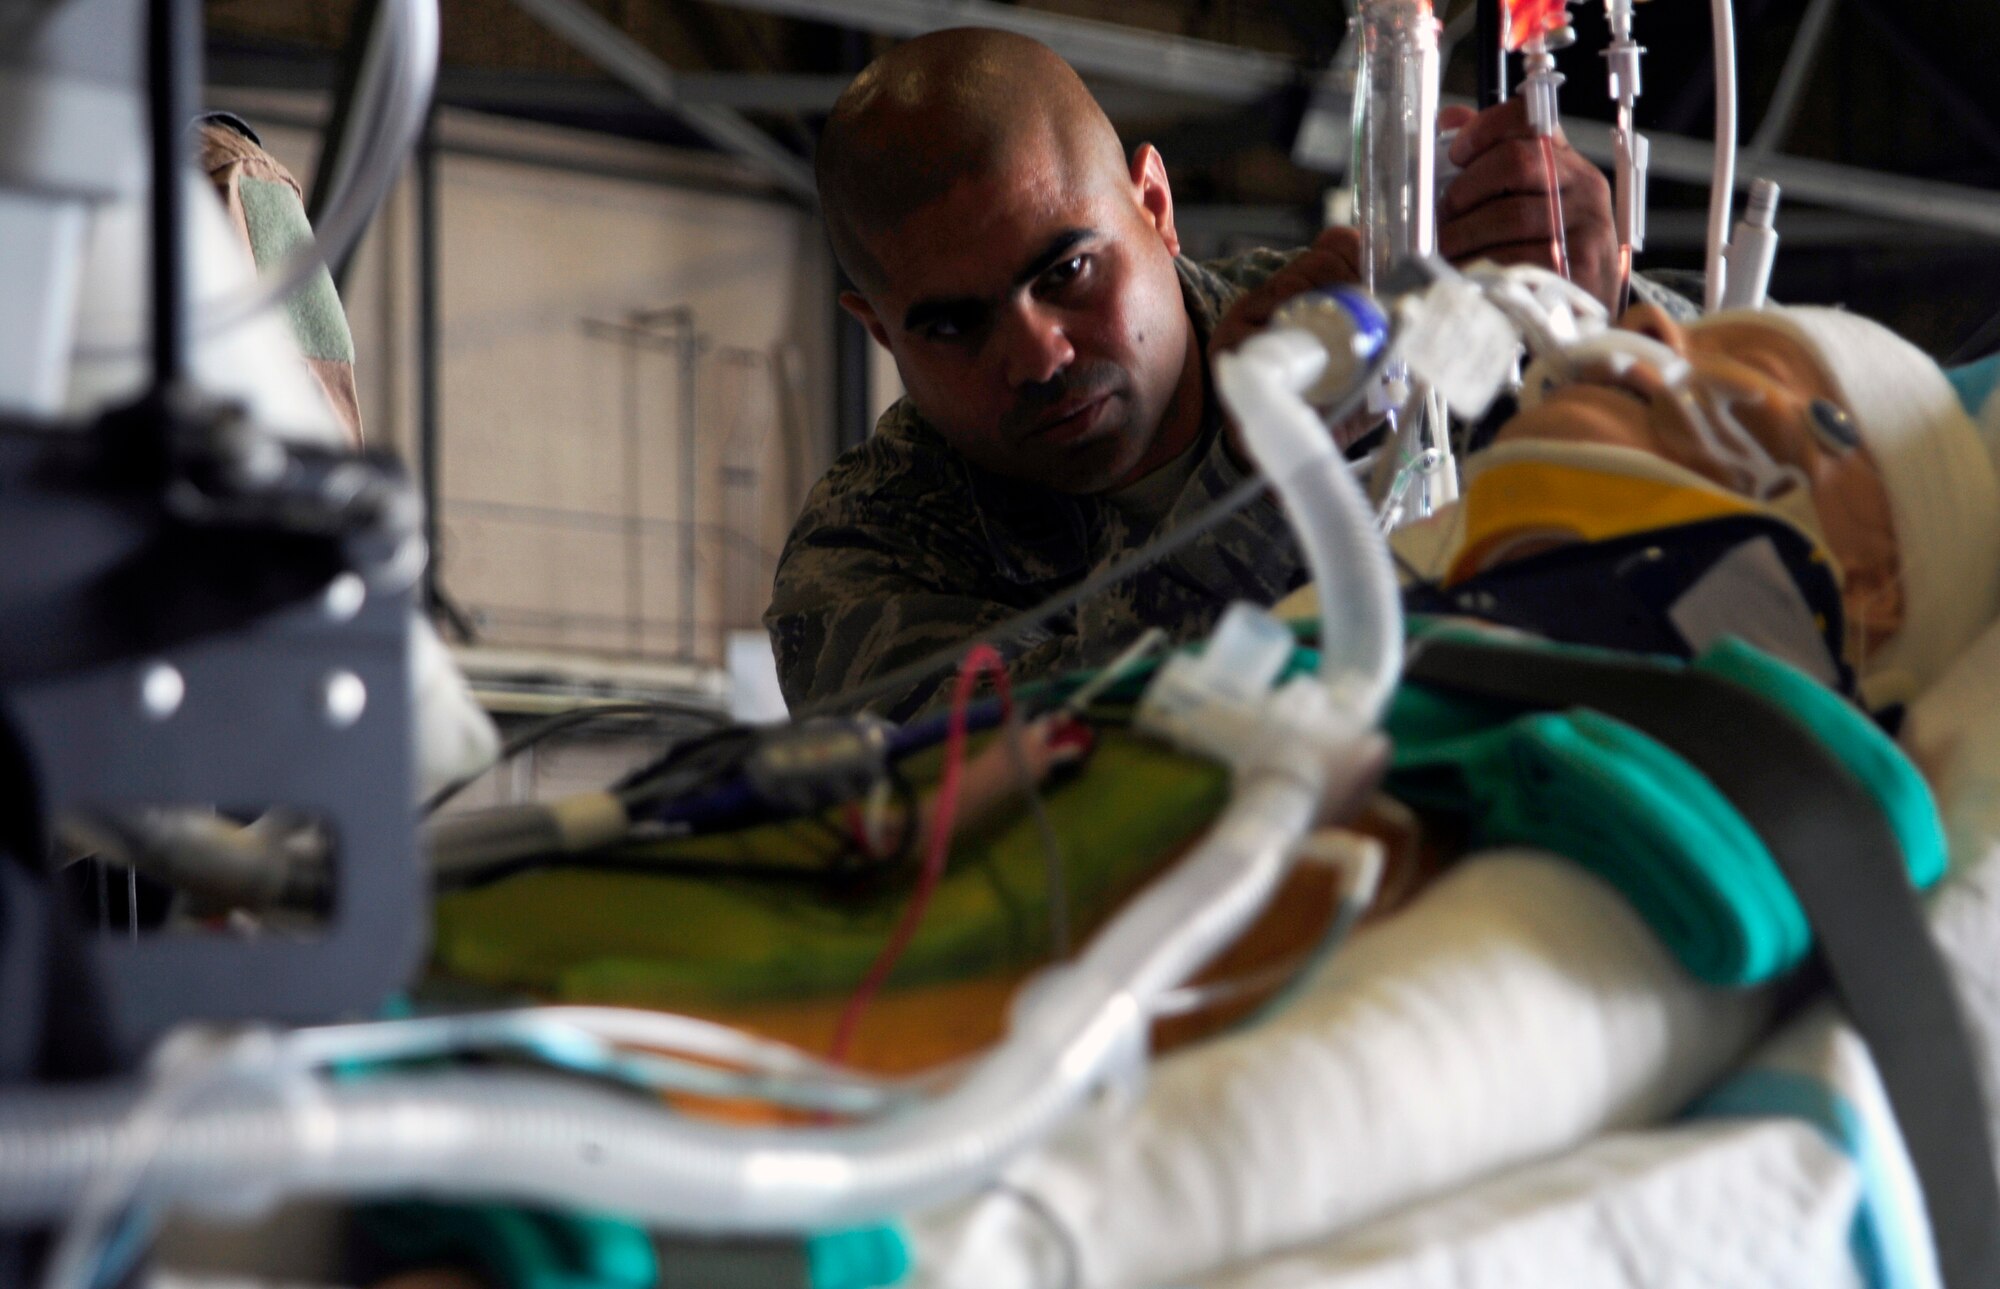 JOINT BASE LEWIS-MCCHORD, Wash. - Capt. Orlando Duran sets up a display of critical care air transport team equipment June 19, 2011. Duran is a presenter at the International Aeromedical Evacuation/En Route Care Conference, held here July 20-21, 2011. The conference is the first, U.S.-led international symposium on in-flight medical care. The event features speakers from a variety of countries sharing their stories, advice and lessons learned with hundreds of fellow doctors, nurses, paramedics and medical specialists. Officials expect representatives from 28 nations to attend the event. Duran is a registered nurse stationed at Lackland Air Force Base, Texas. (U.S. Air Force photo/Staff Sgt. J.G. Buzanowski)